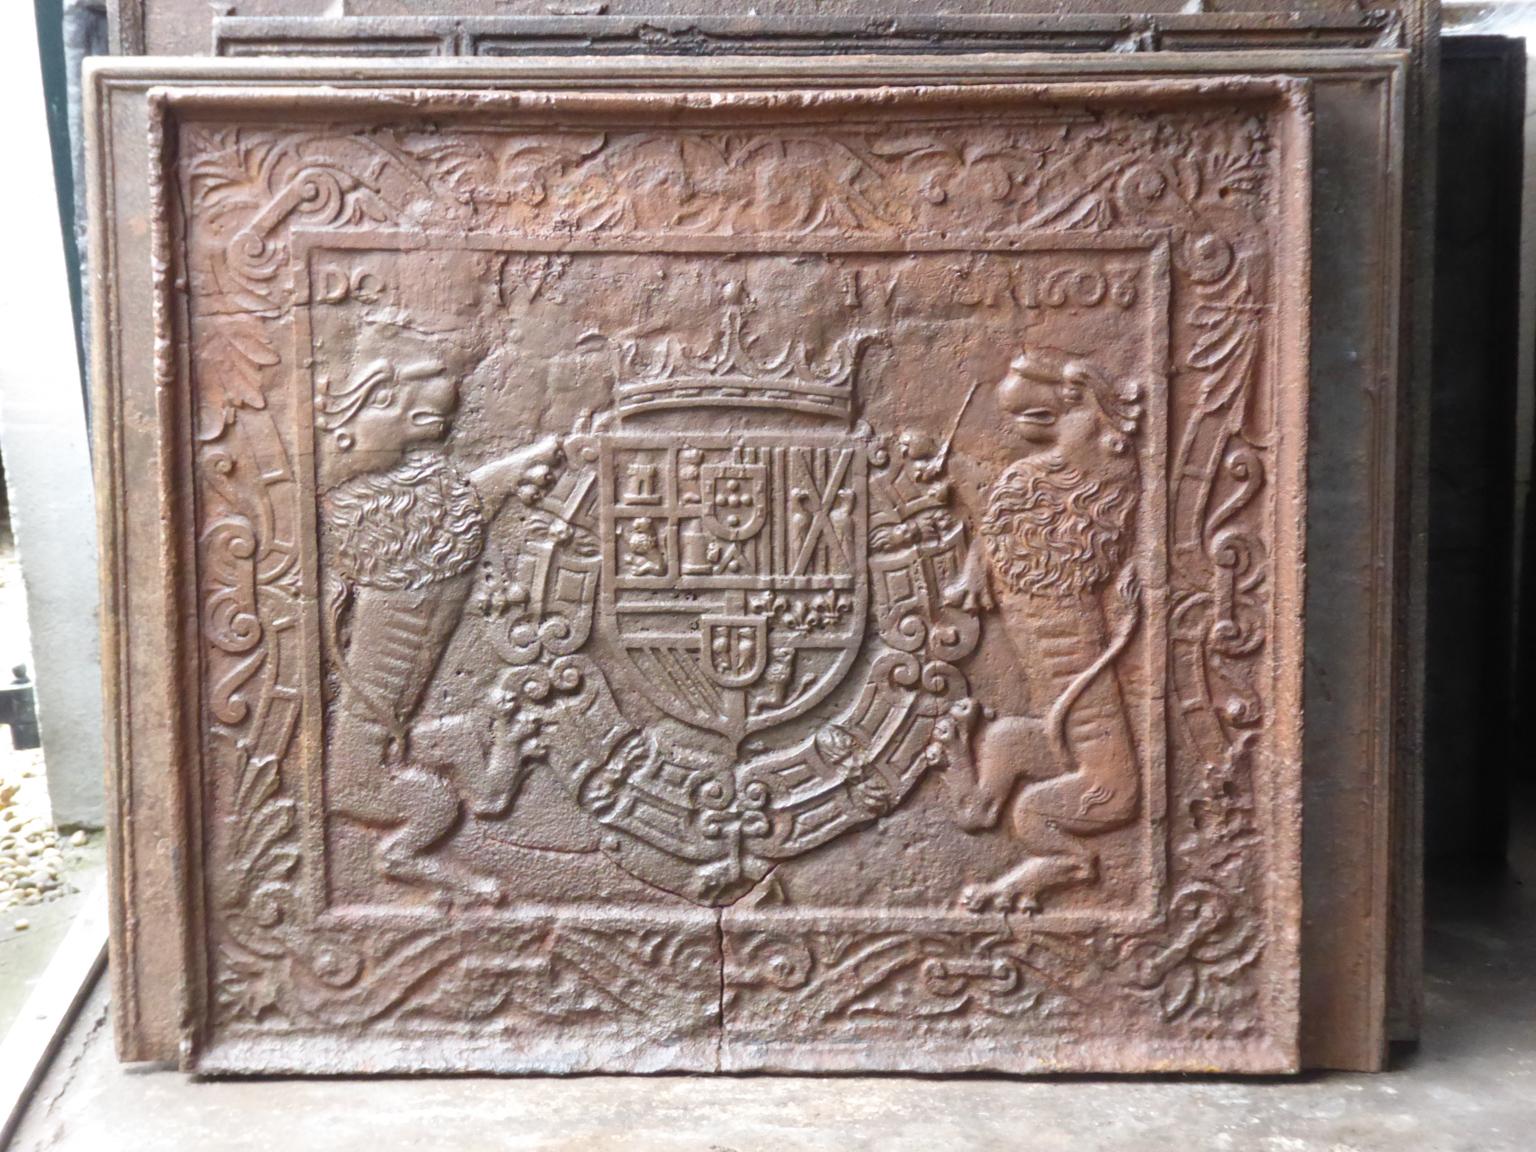 Renaissance fireback with the coat of arms of Philip III of Spain. The fireback is made of cast iron and has a brown patina. The fireback has serious cracks and can be used for decorative purpose only, or as a backsplash. Upon request it can be made